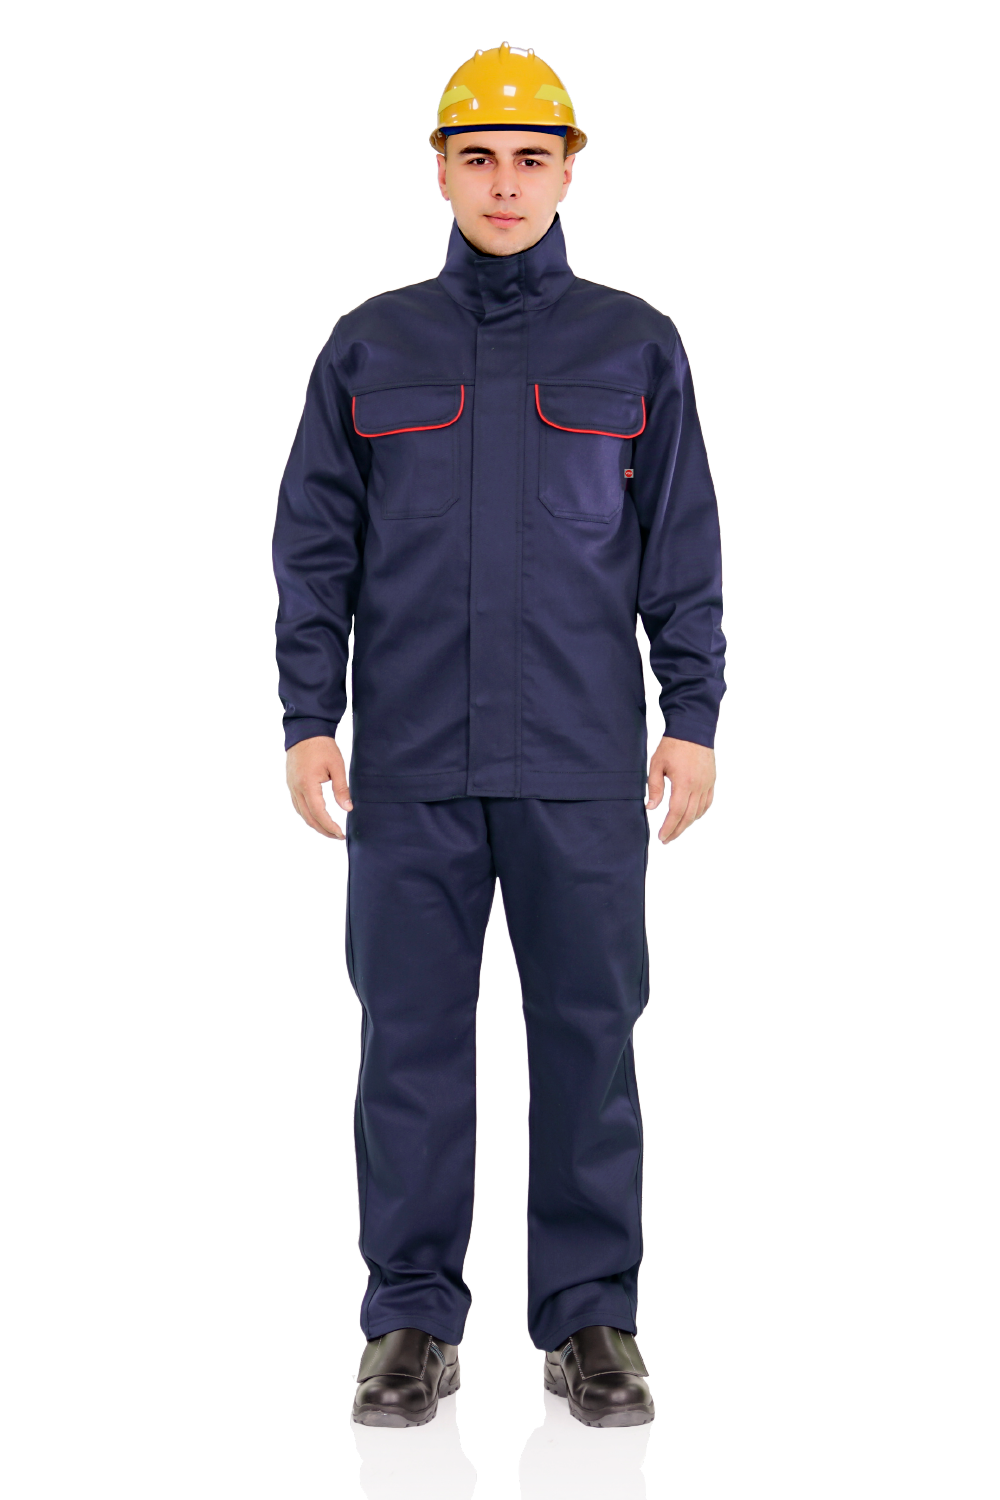 AXIS – 837113 Jacket & Trousers